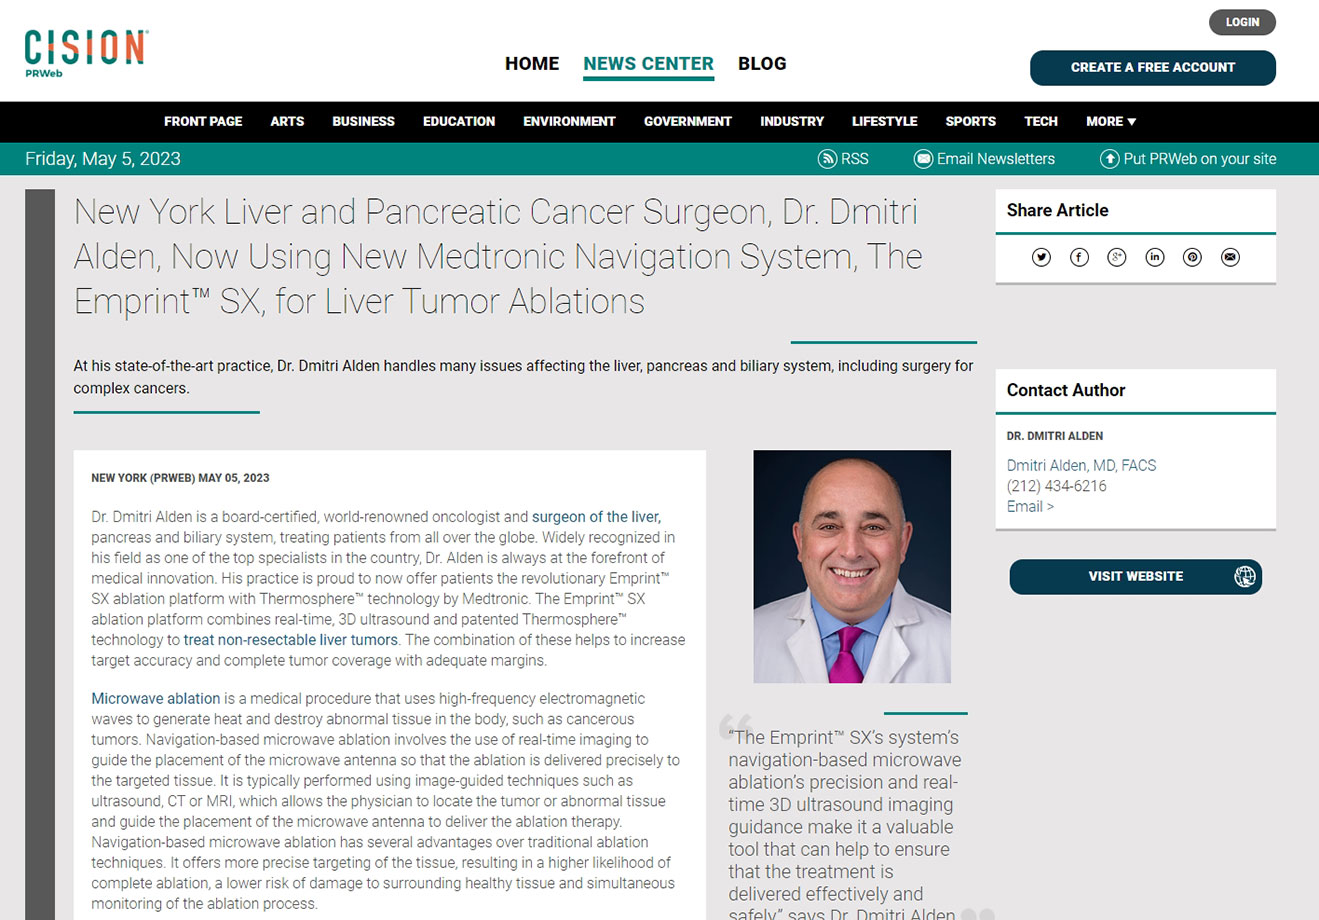 screenshot of the article titled: New York Liver and Pancreatic Cancer Surgeon, Dr. Dmitri Alden, Now Using New Medtronic Navigation System, The Emprint™ SX, for Liver Tumor Ablations